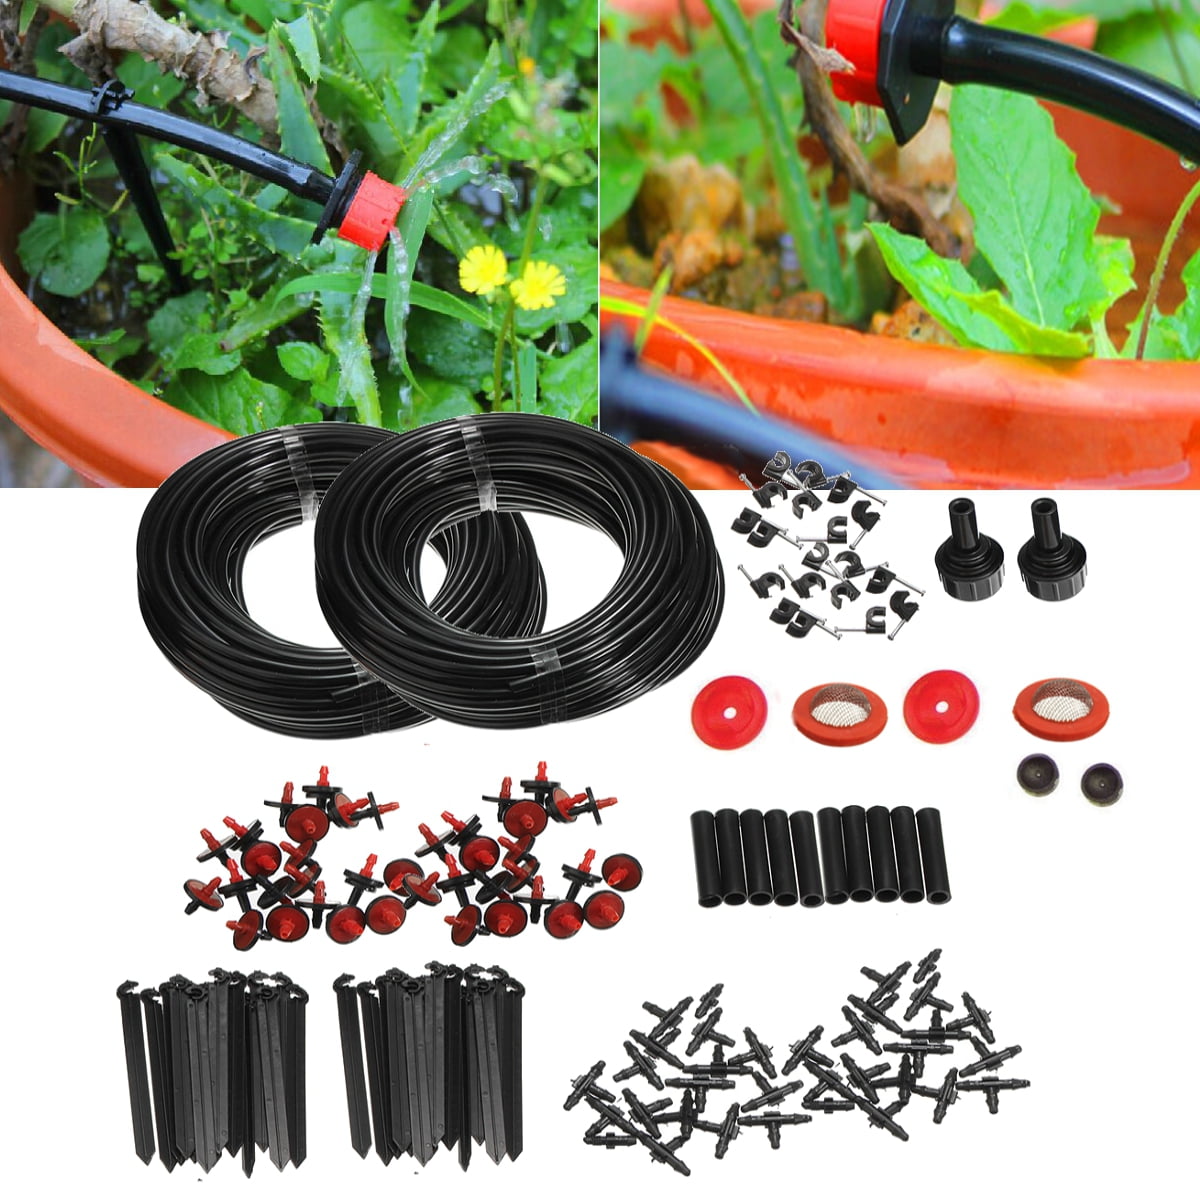 Automatic Drip Irrigation System Kit Plant Timer Self Watering Garden Hose 10M 